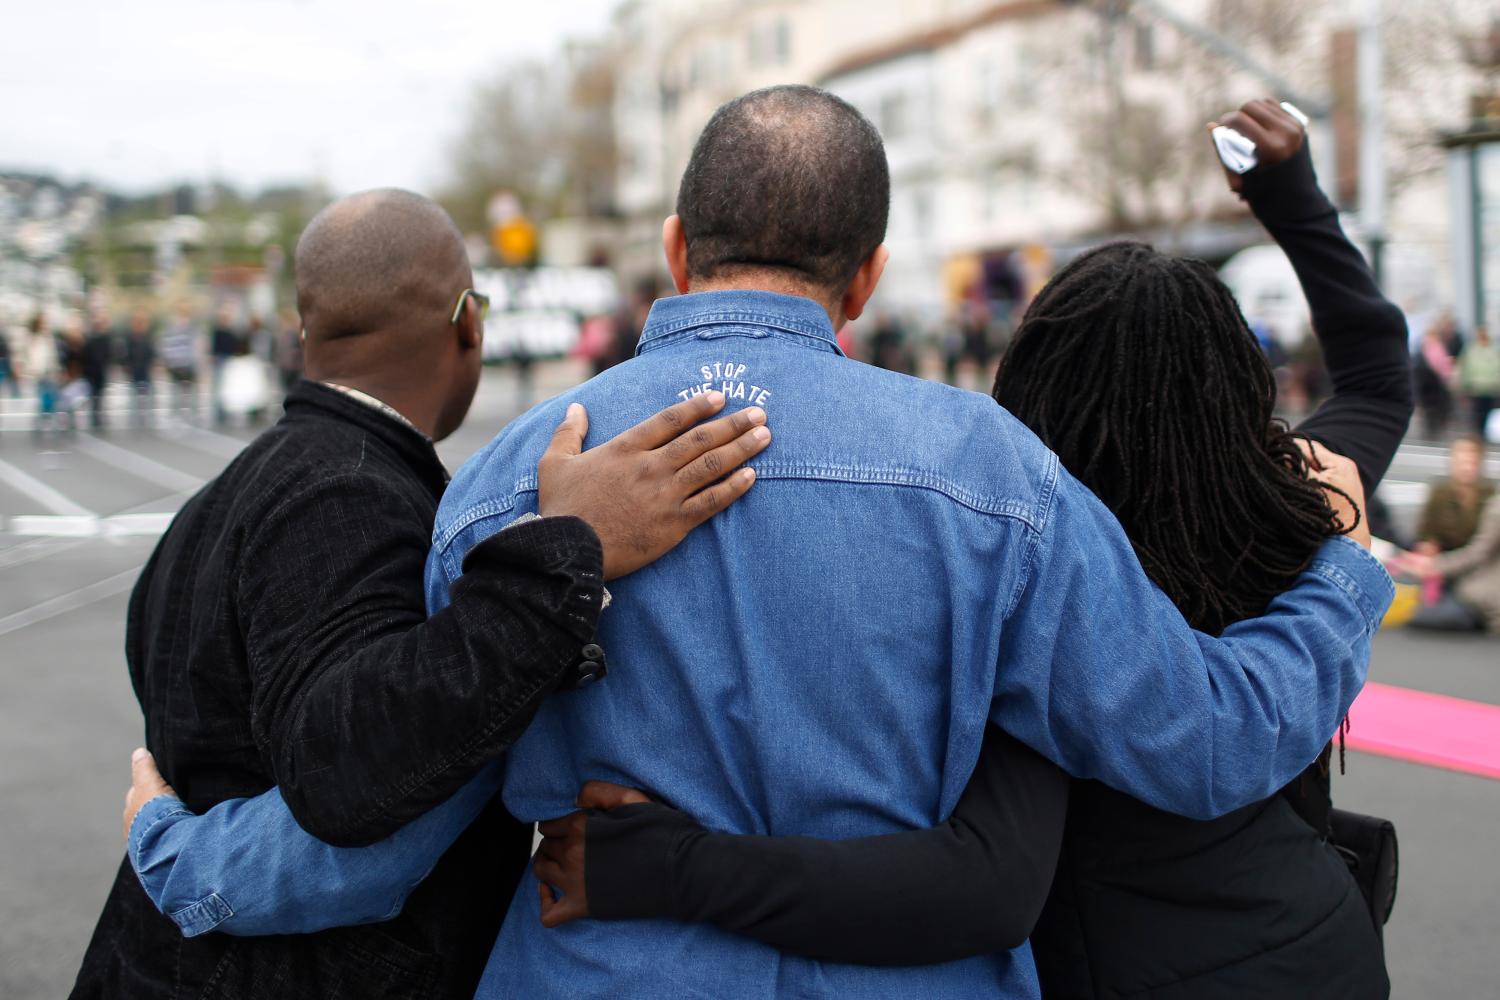 Three protesters embrace each other during a peaceful protest against police violence organized by the San Francisco LGBT Community Center in San Francisco, California December 24, 2014. An 18-year old black teen was fatally shot by police at a gas station late on Tuesday in a St. Louis suburb near where unarmed teen Michael Brown was killed by a white officer in August. REUTERS/Stephen Lam  (UNITED STATES - Tags: CRIME LAW CIVIL UNREST)